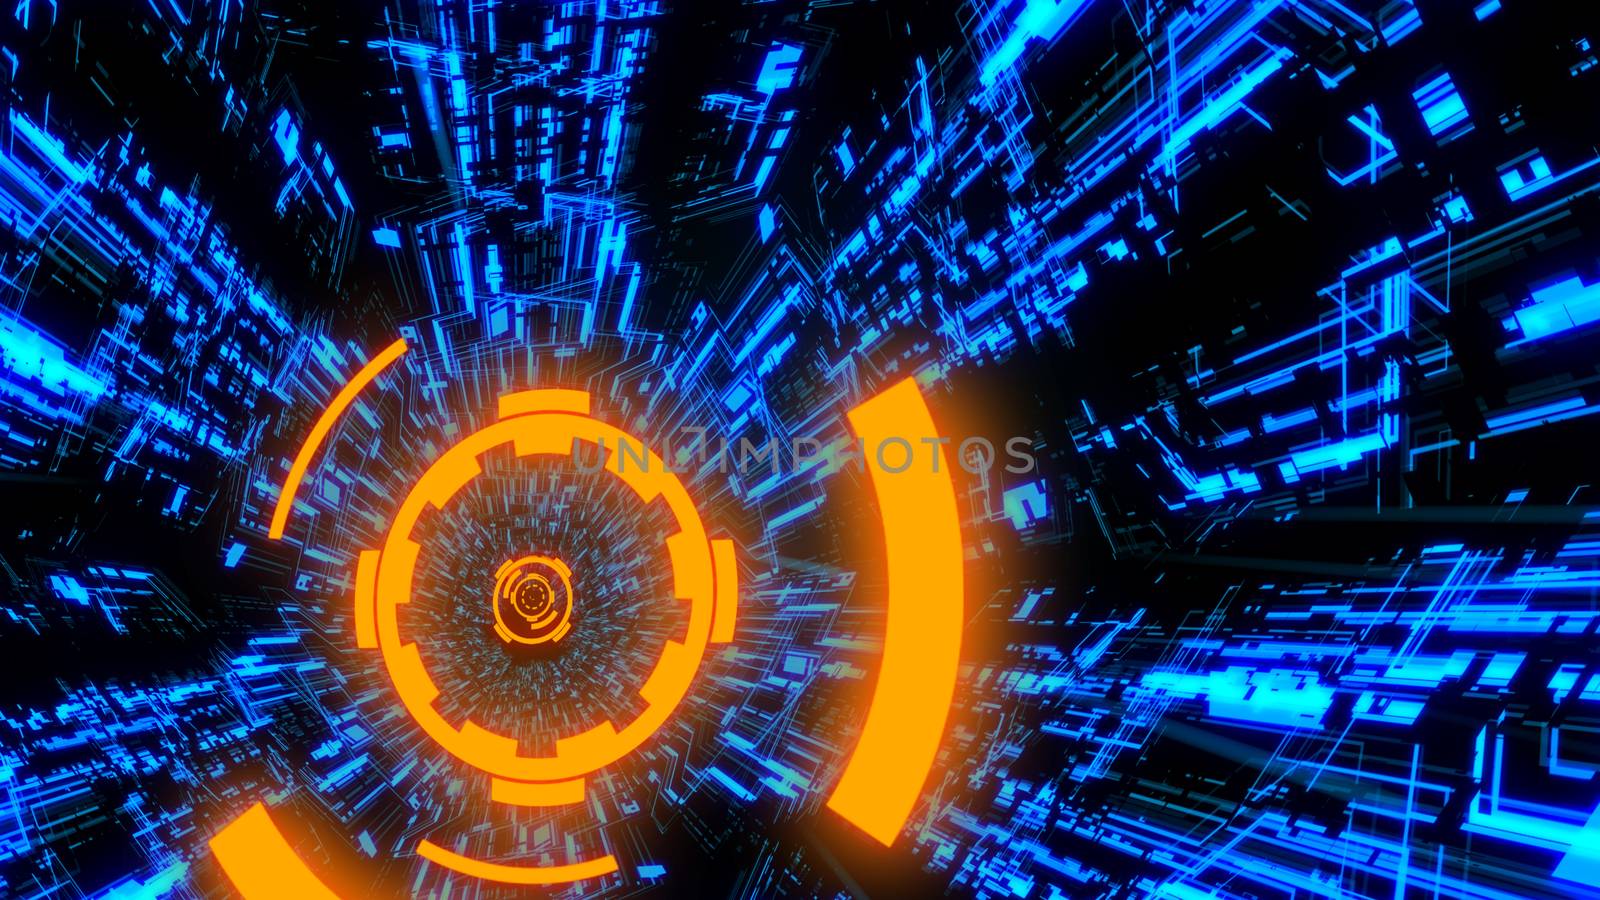 3D Digital Circuit System Tunnels and Waves with Digital Circles in the middle in Orange-Blue color theme Background Ver.3 by ariya23156